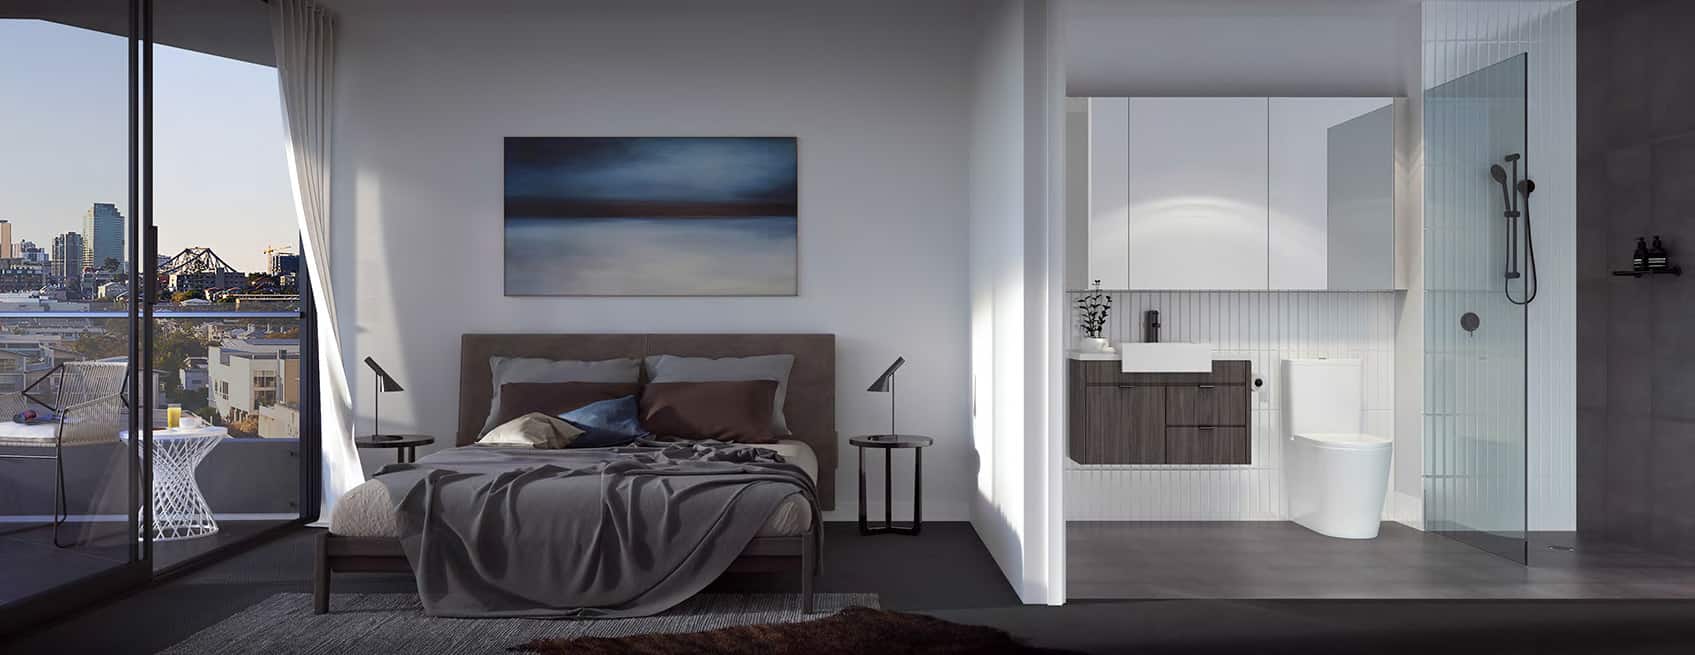 Artist's Impression of a Le Bain Bedroom